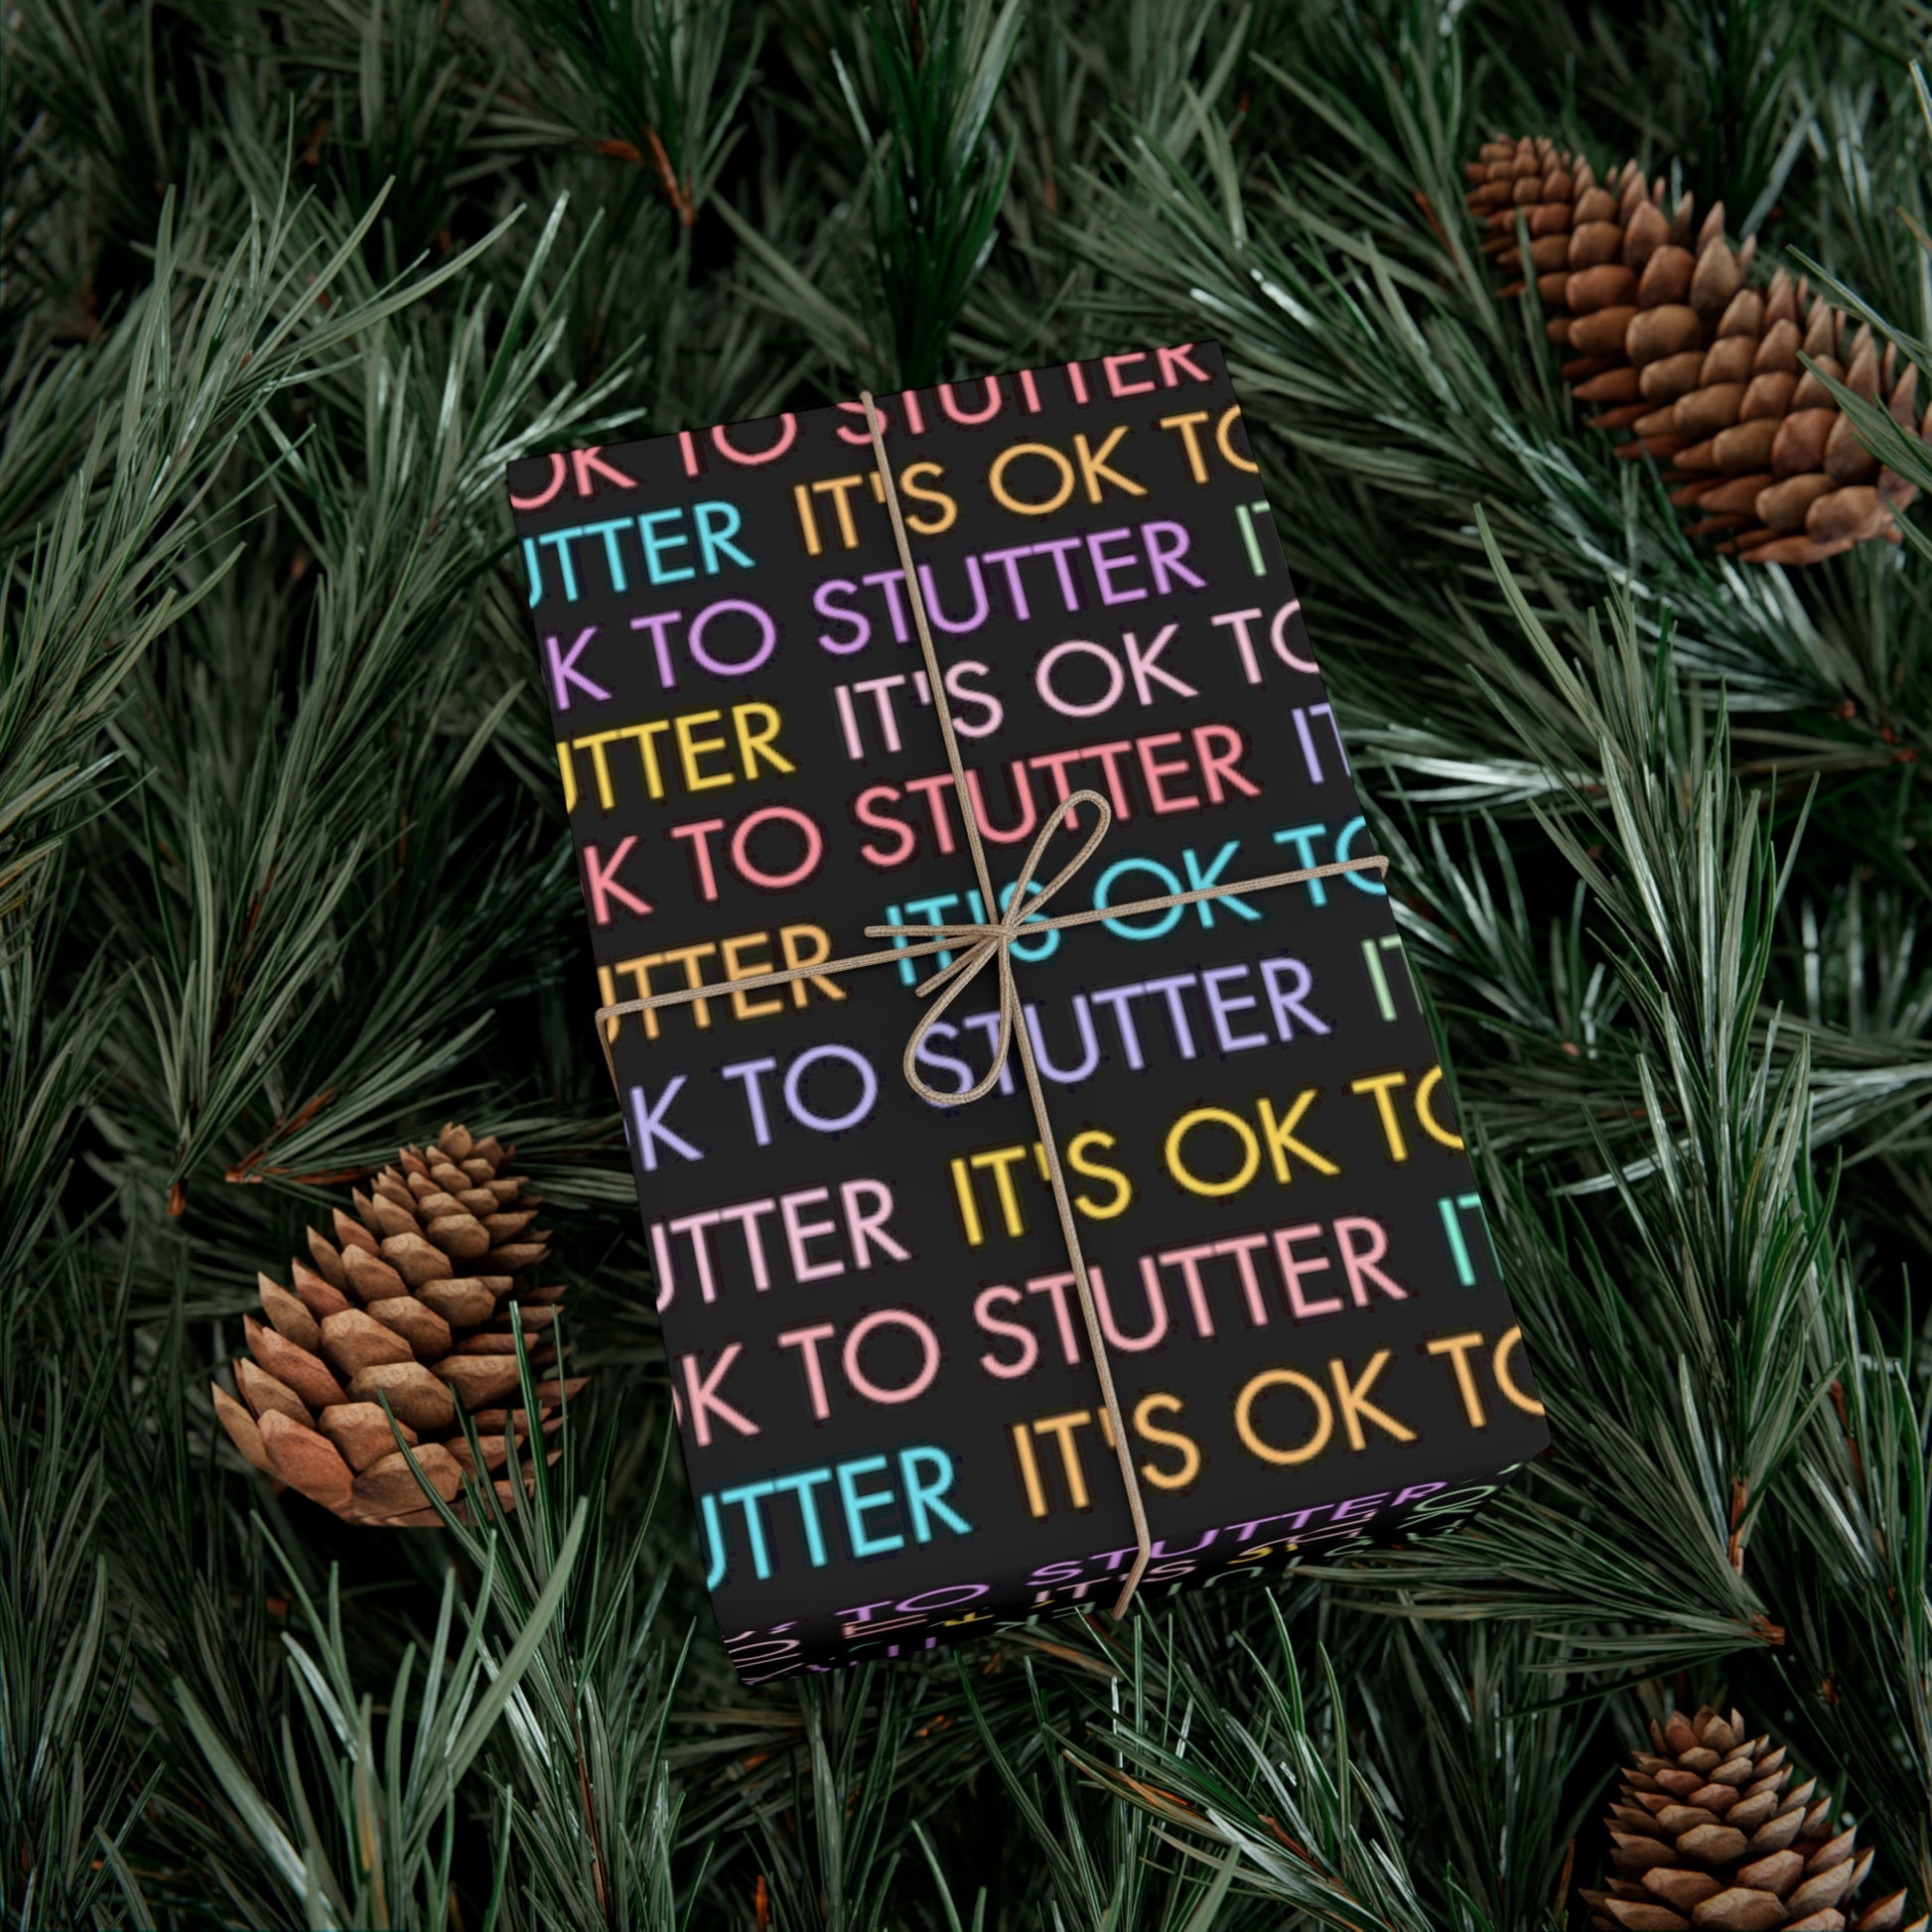 It's OK to Stutter Multicolored Gift Wrap for People Who Stutter - Black